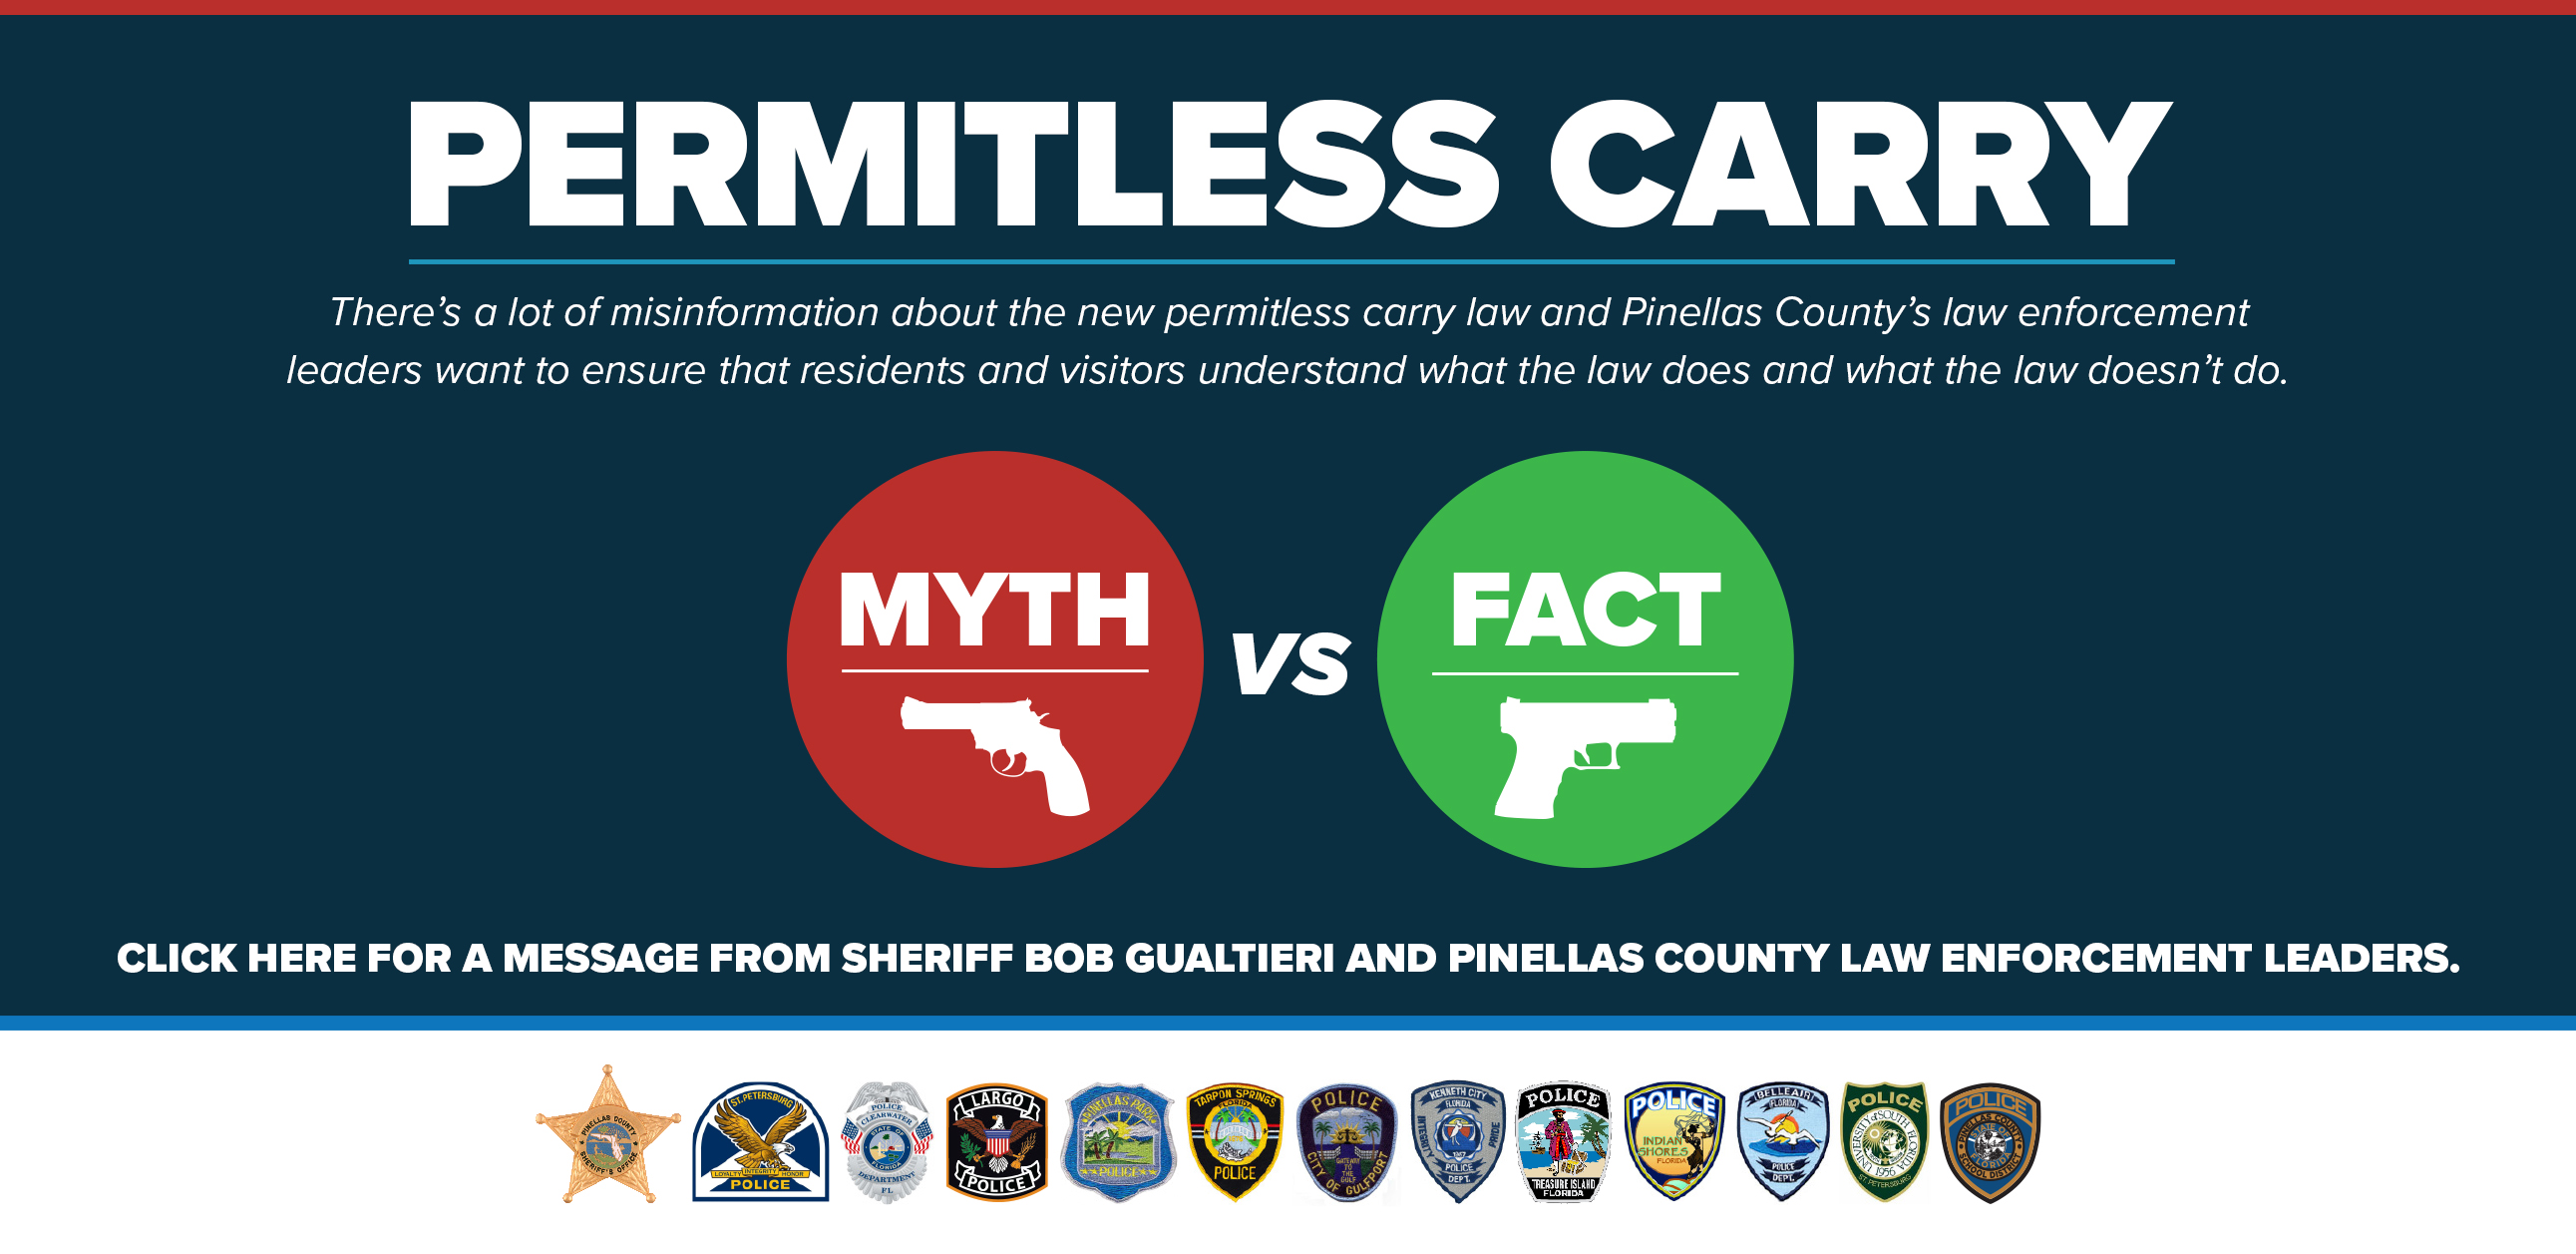 There's a lot of misinformation about the new permitless carry law and leaders want to ensure visitors and residents are aware of what the law does and doesn't do. Click here for a message from pinellas county law enfocement leaders.